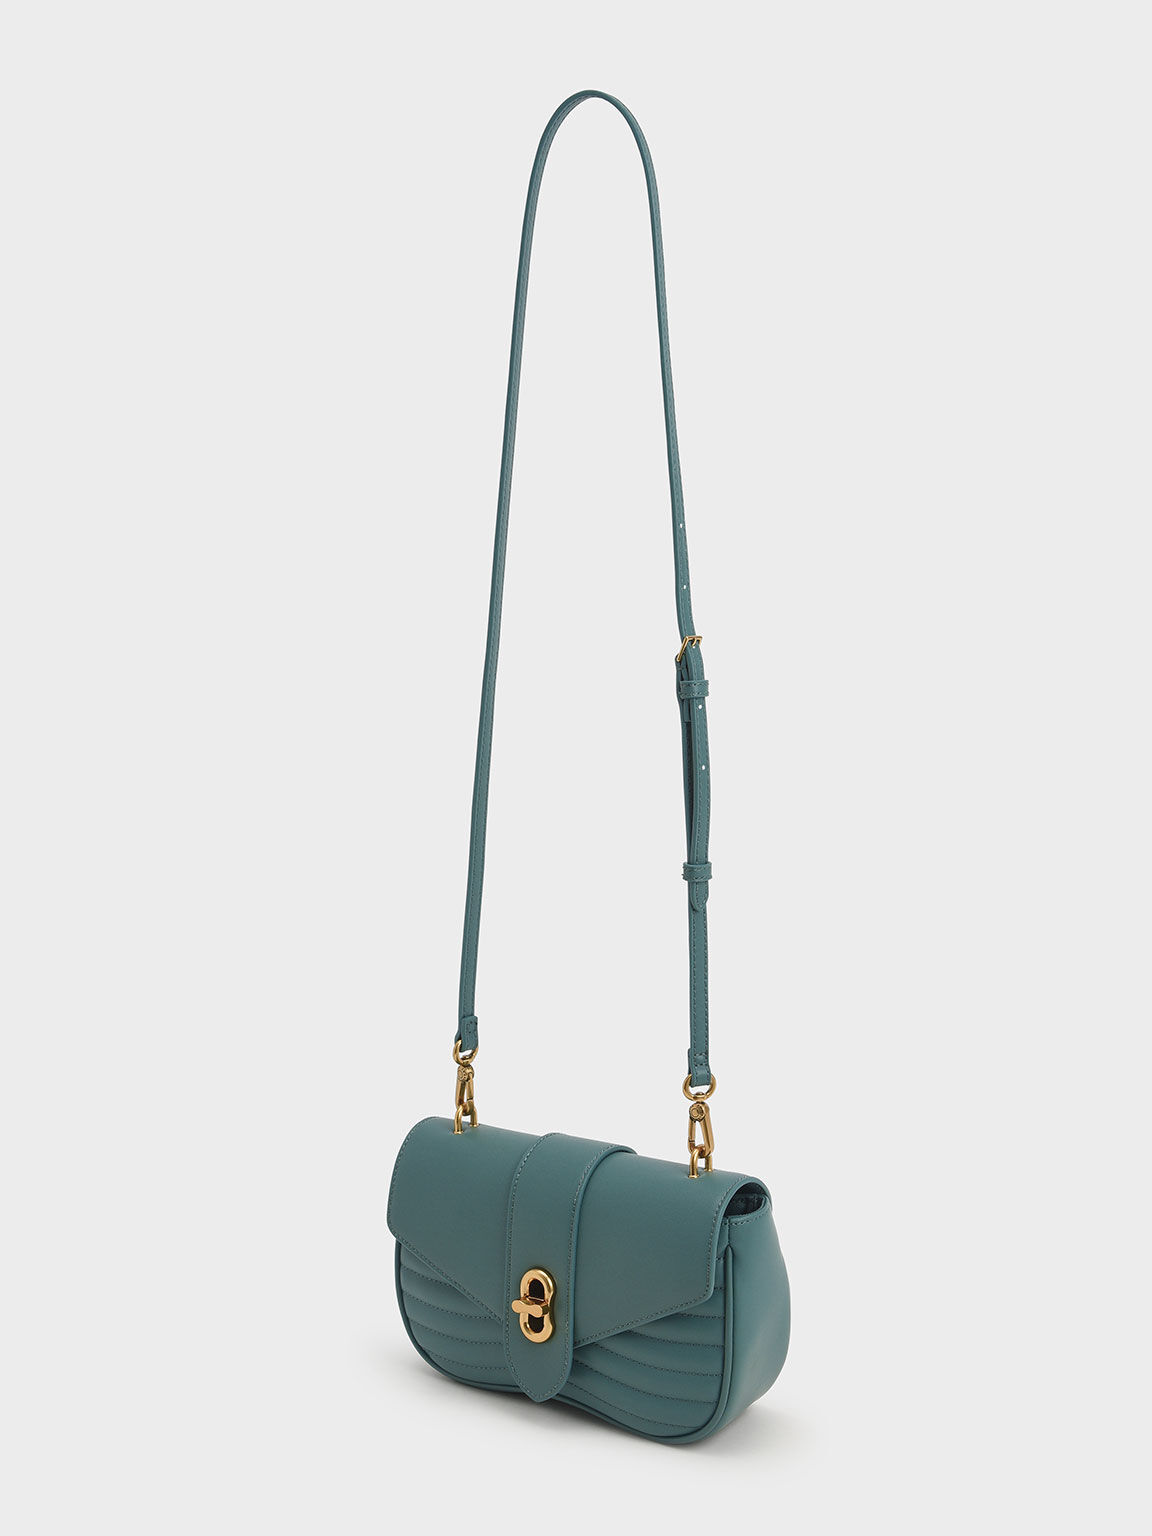 Aubrielle Chain-Handle Panelled Crossbody Bag, Teal, hi-res